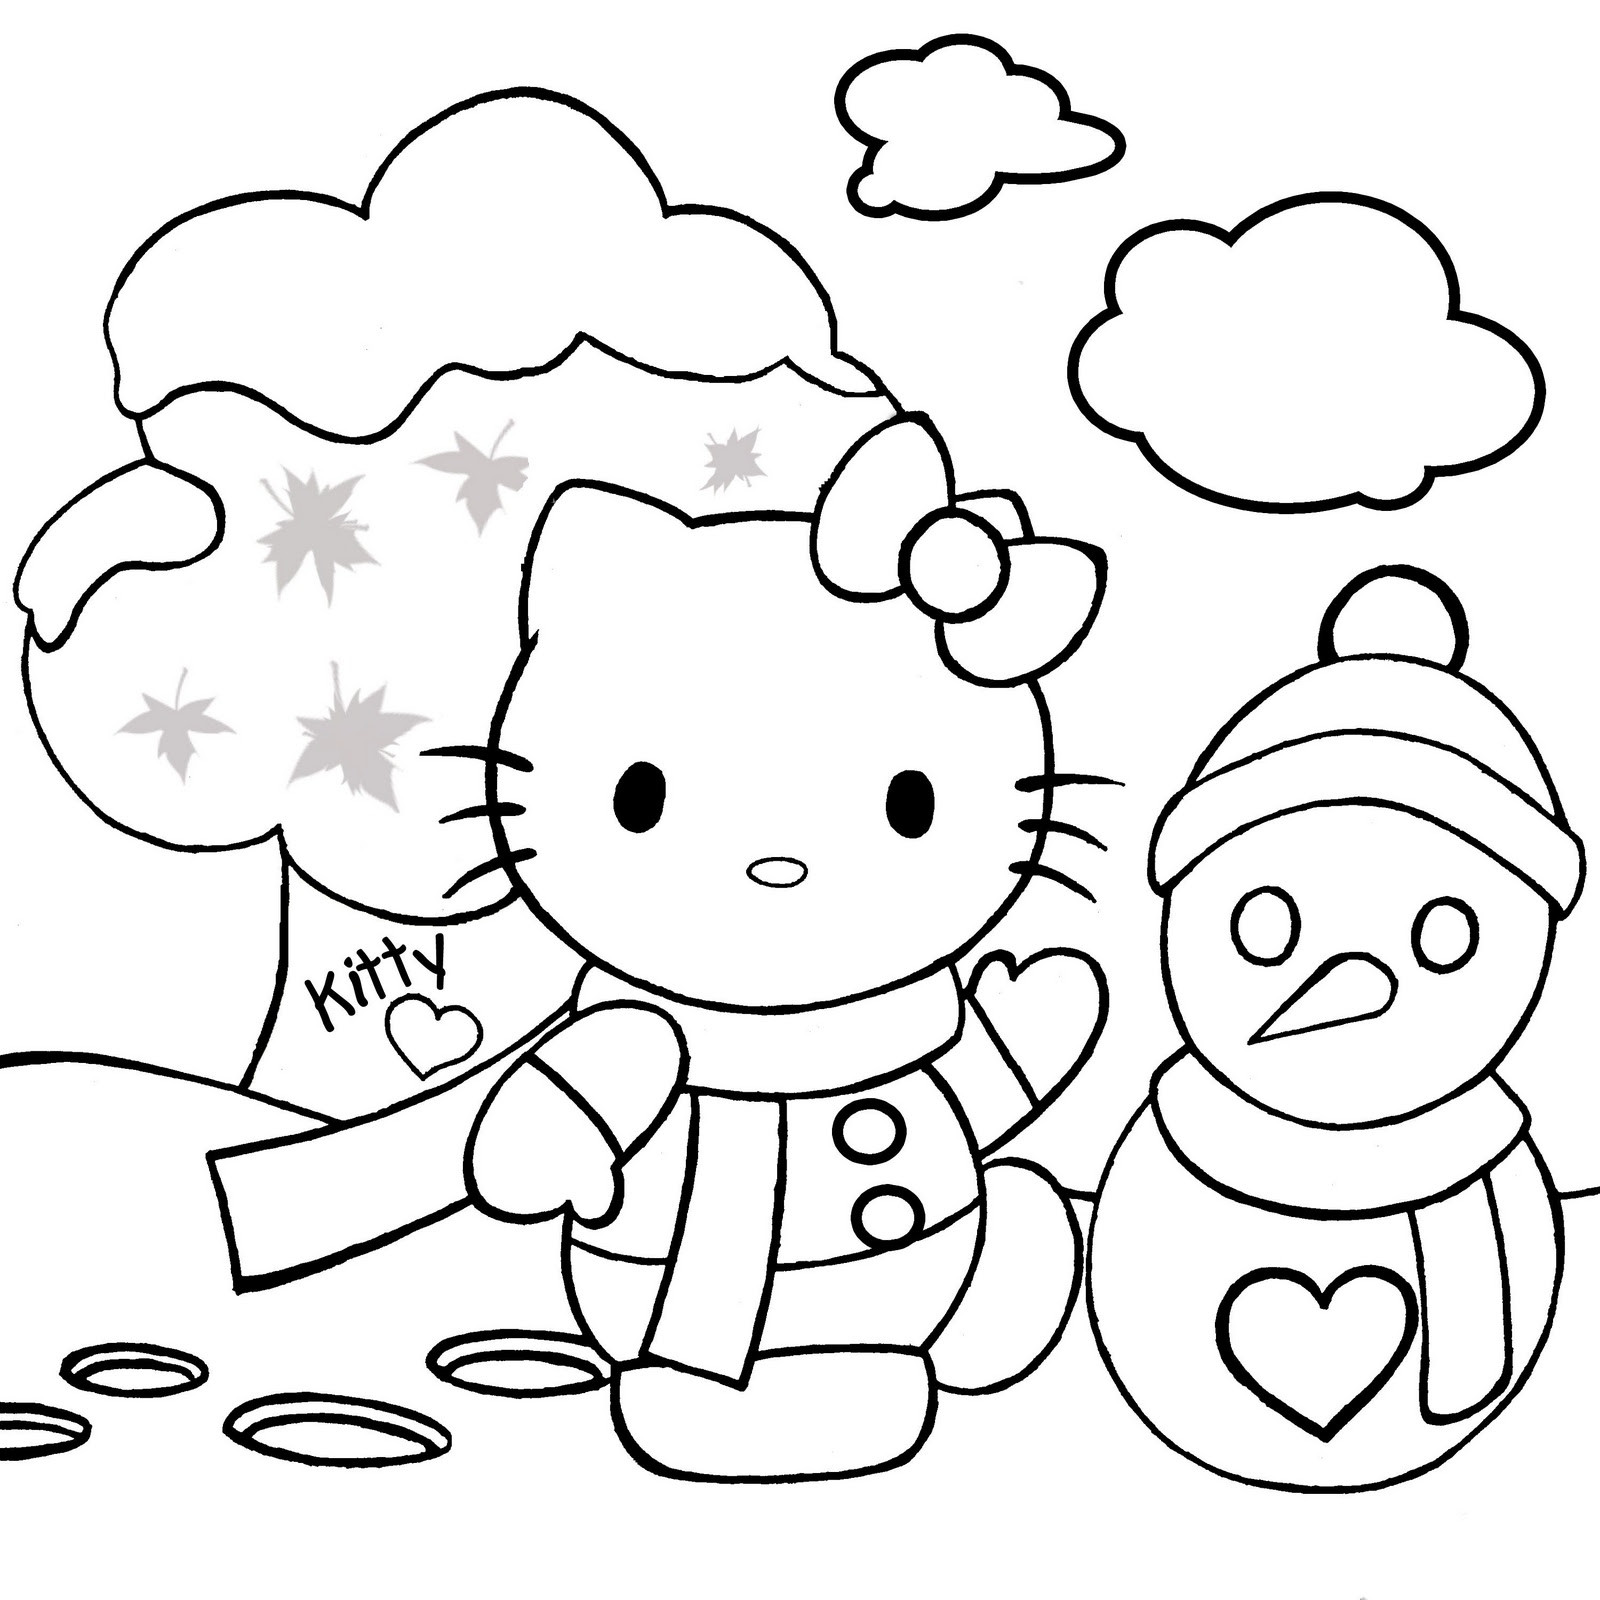 Christmas Kids Coloring Page
 Hello Kitty Christmas Coloring Pages 1